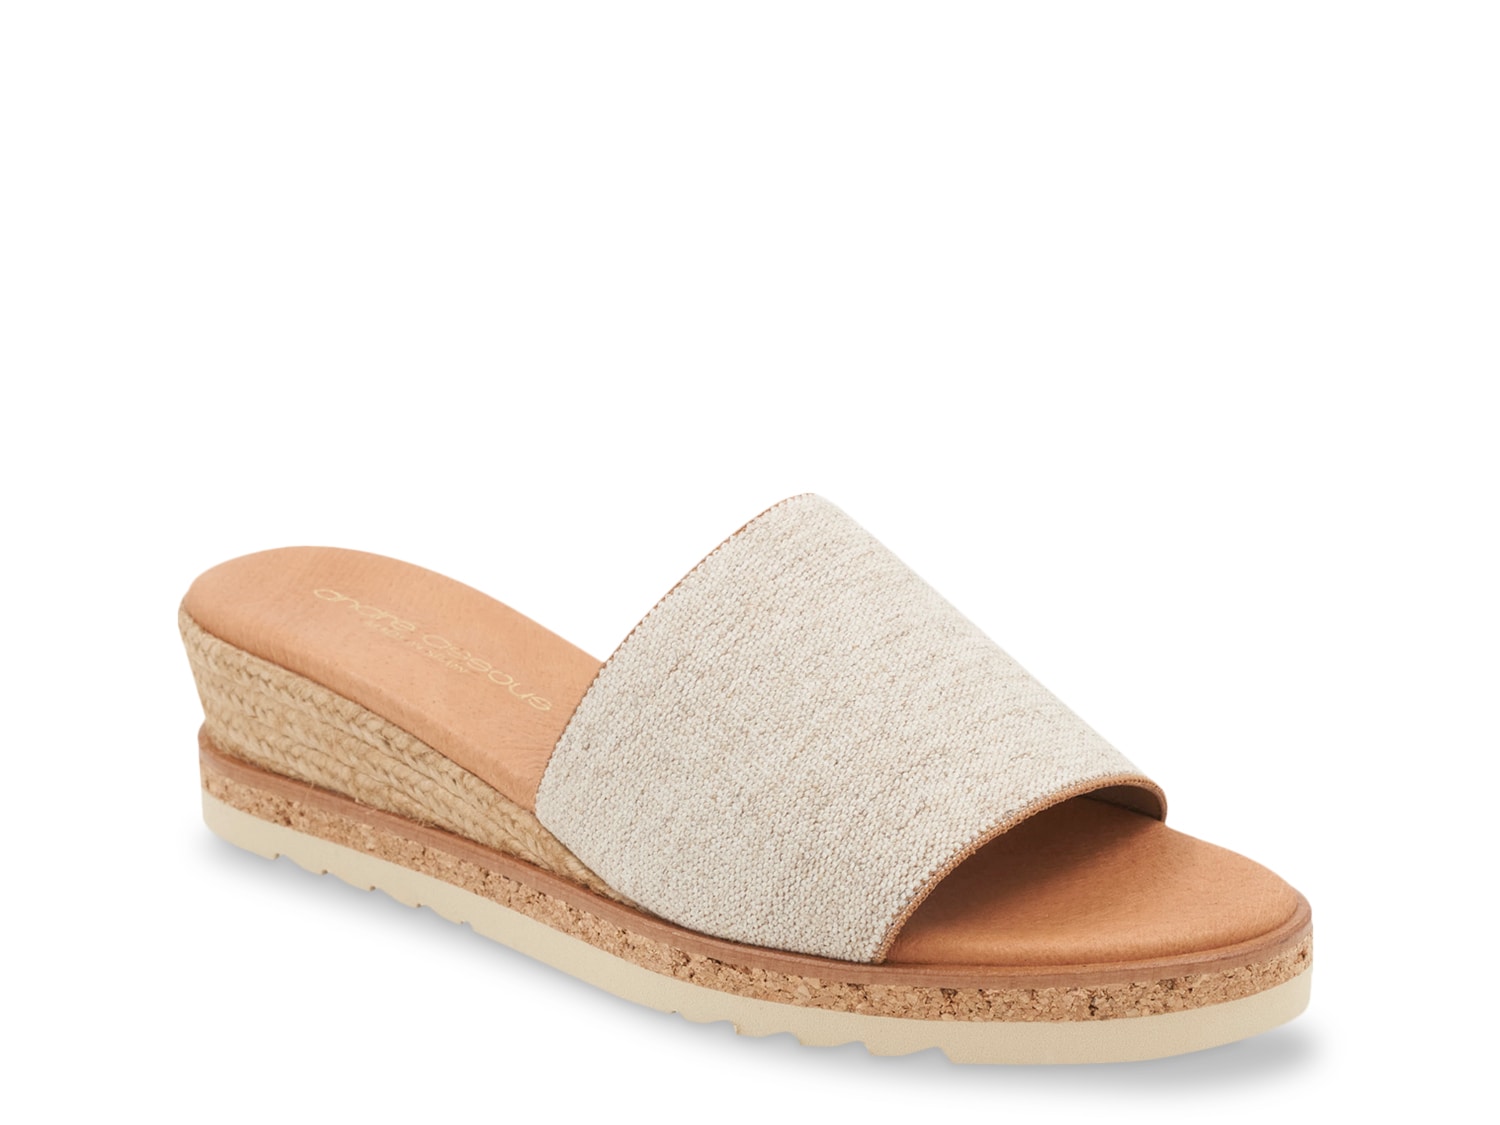 Andre Assous Nessie Wedge Sandal - Free Shipping | DSW